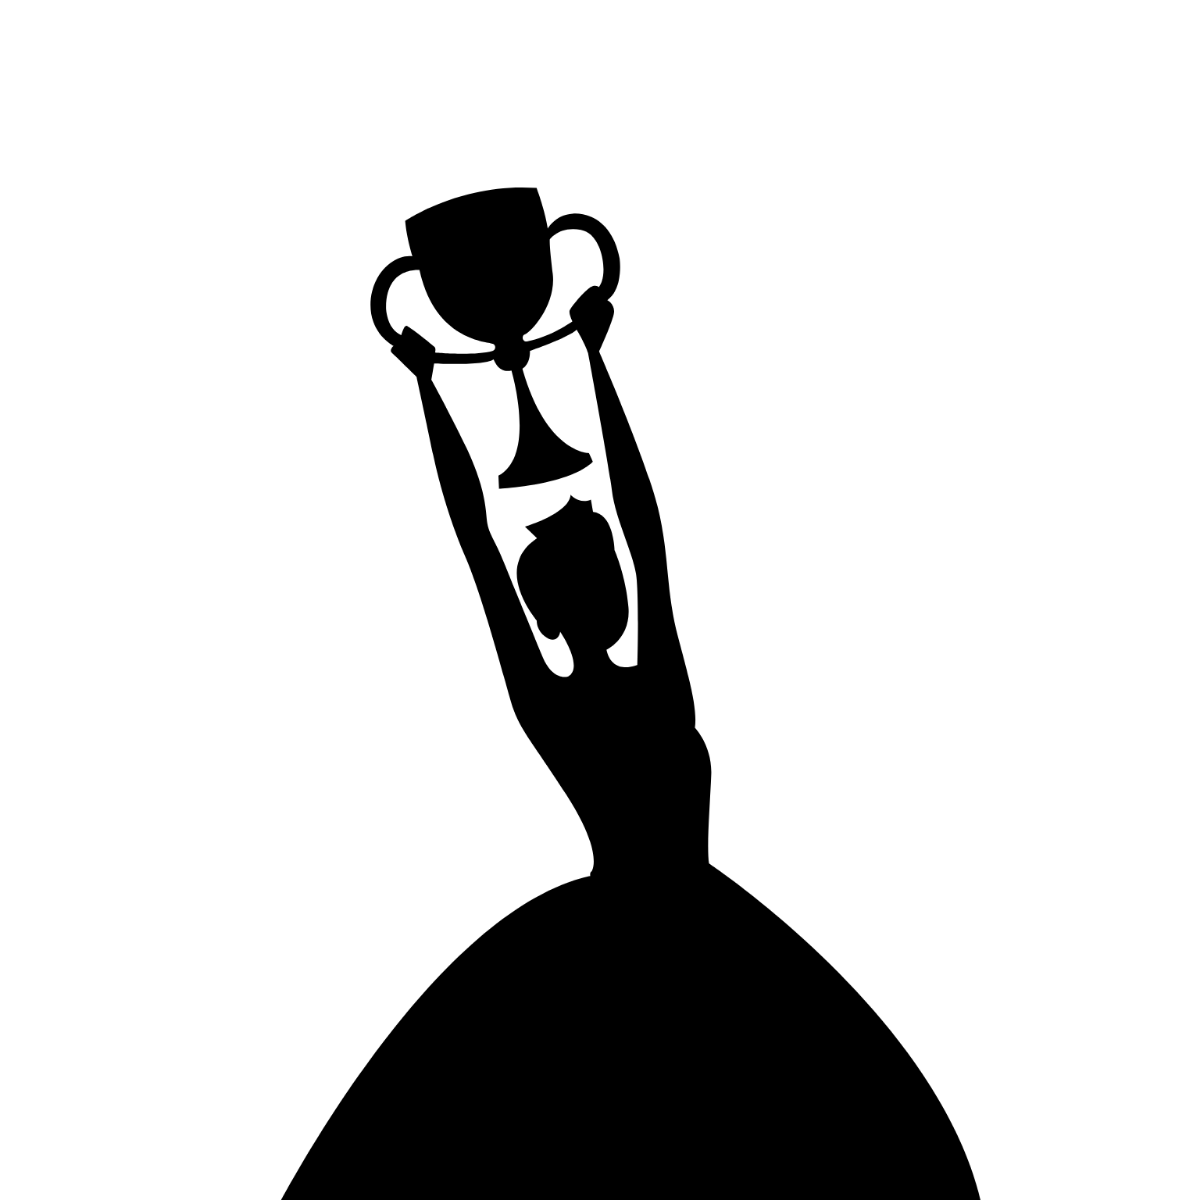 Free Awards Silhouette Template